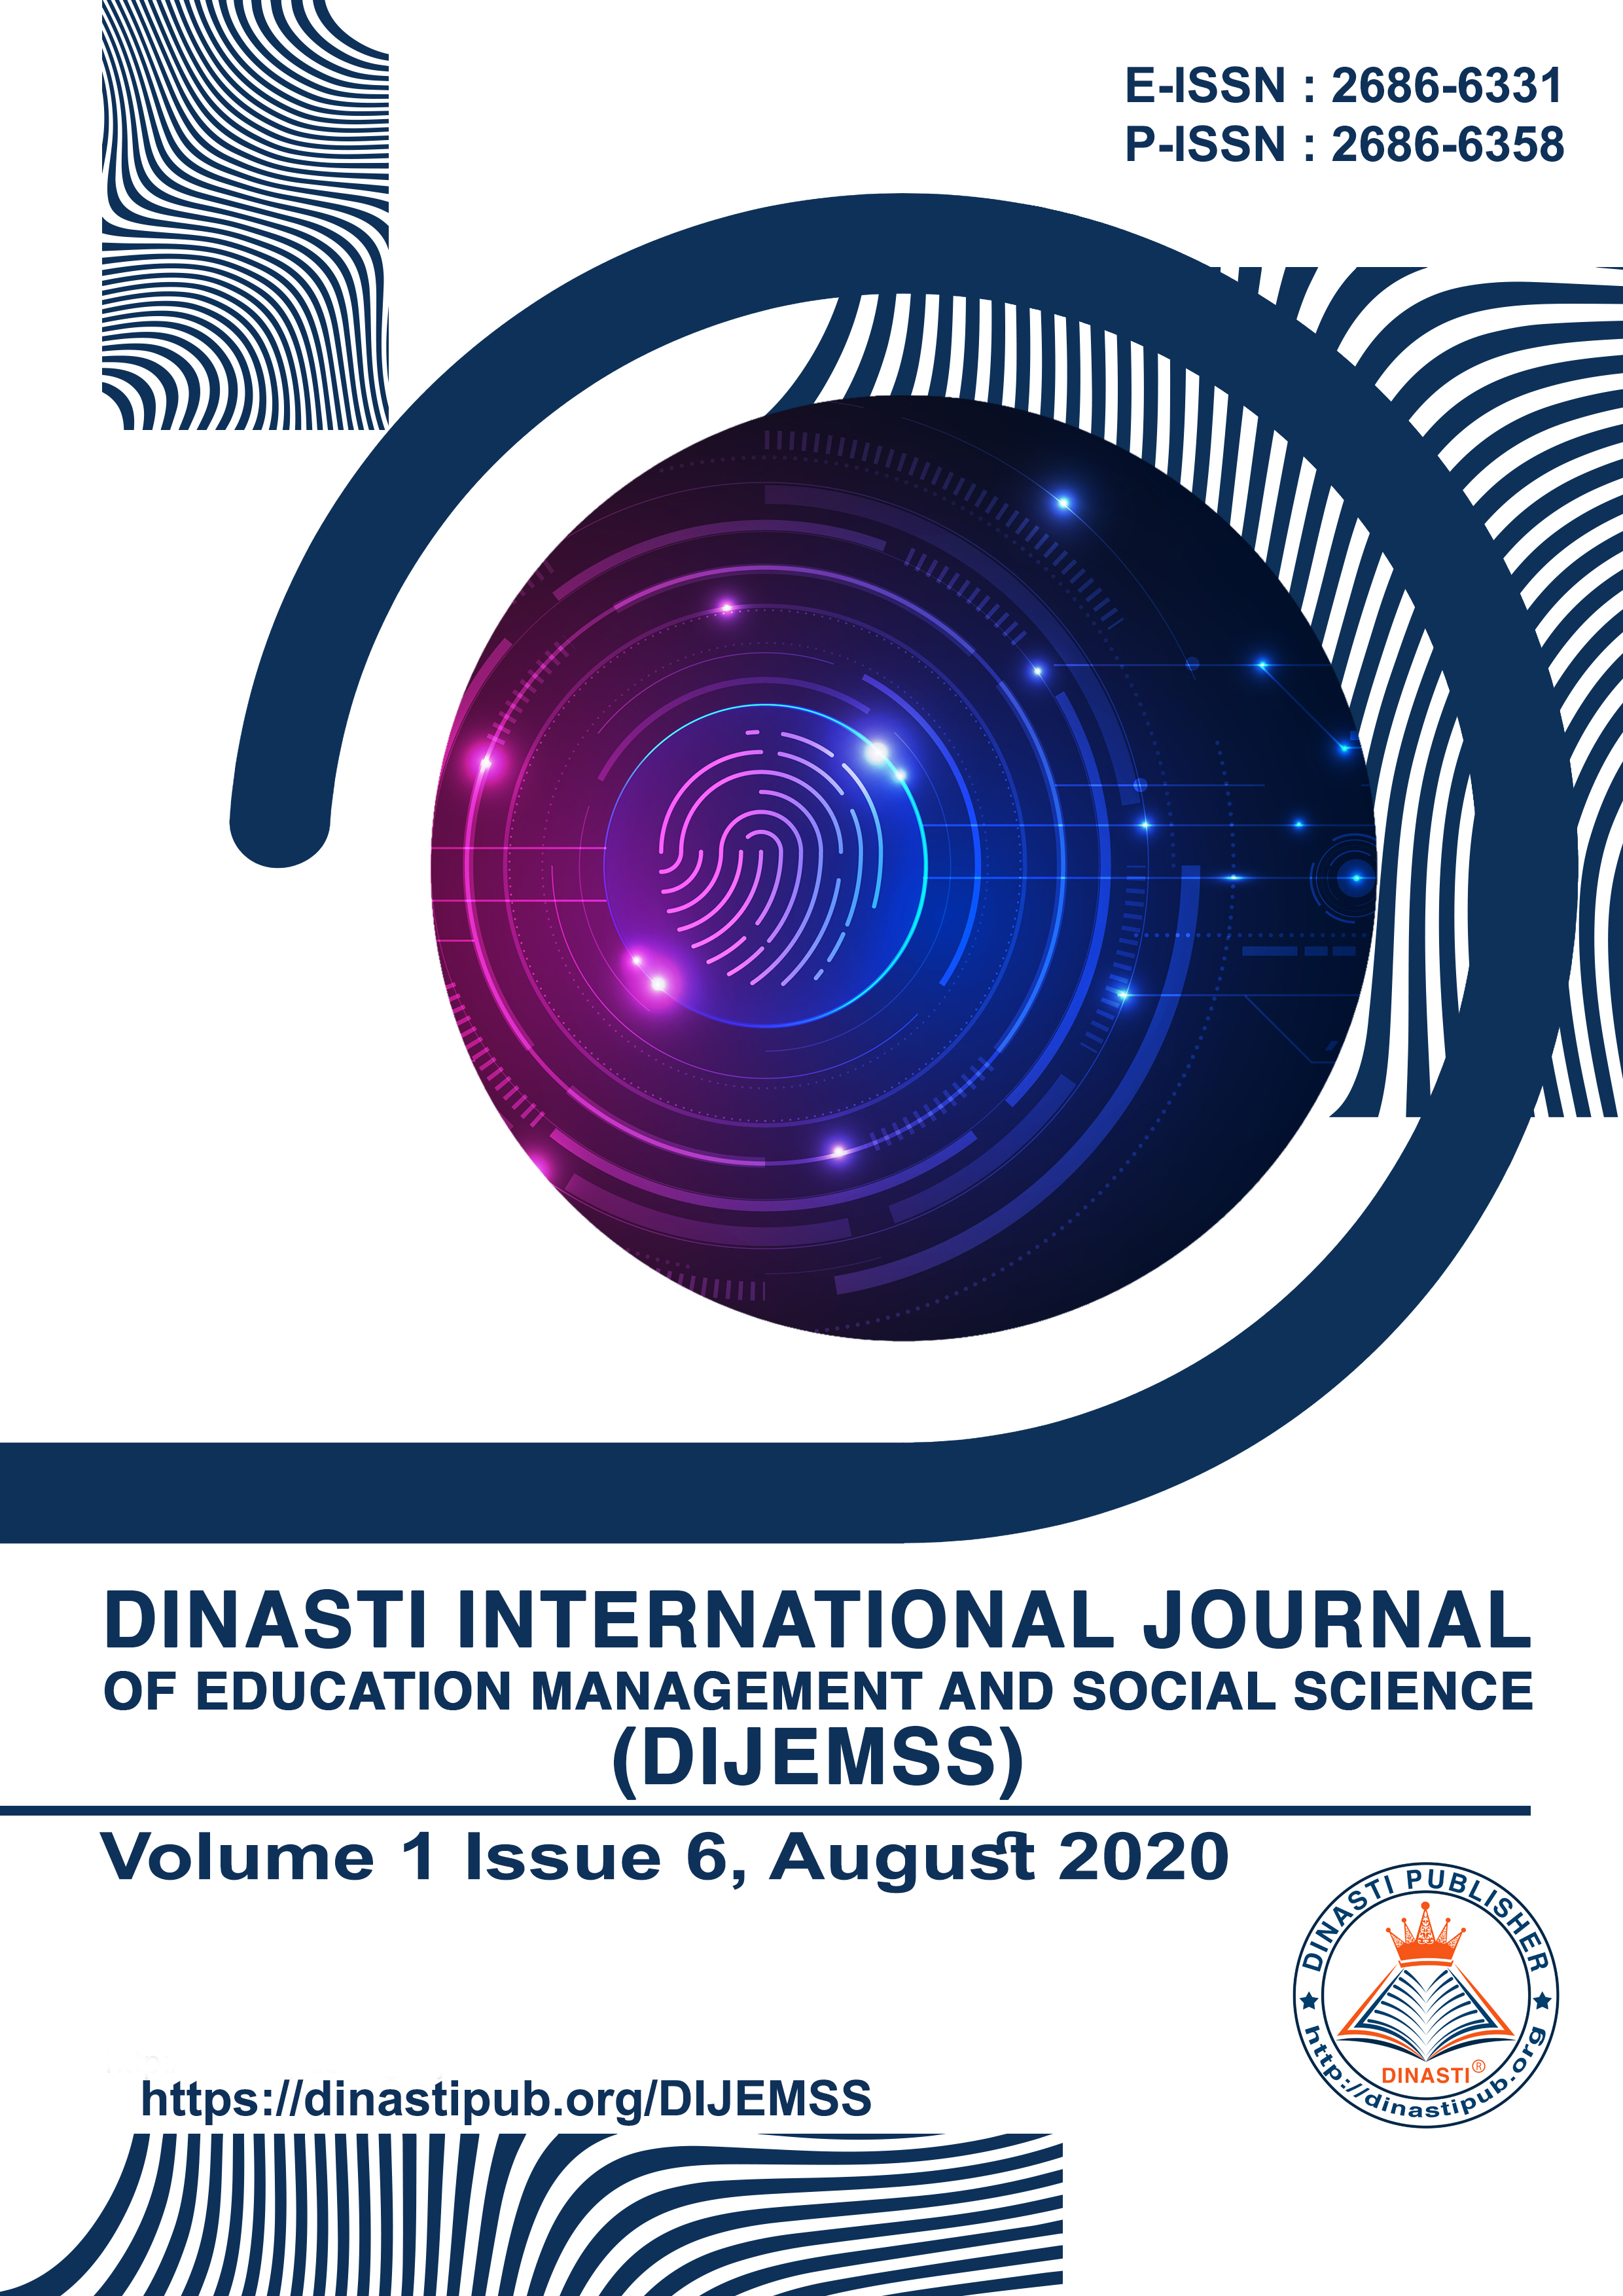 					View Vol. 1 No. 6 (2020): Dinasti International Journal of Education Management and Social Science (August - September 2020)
				